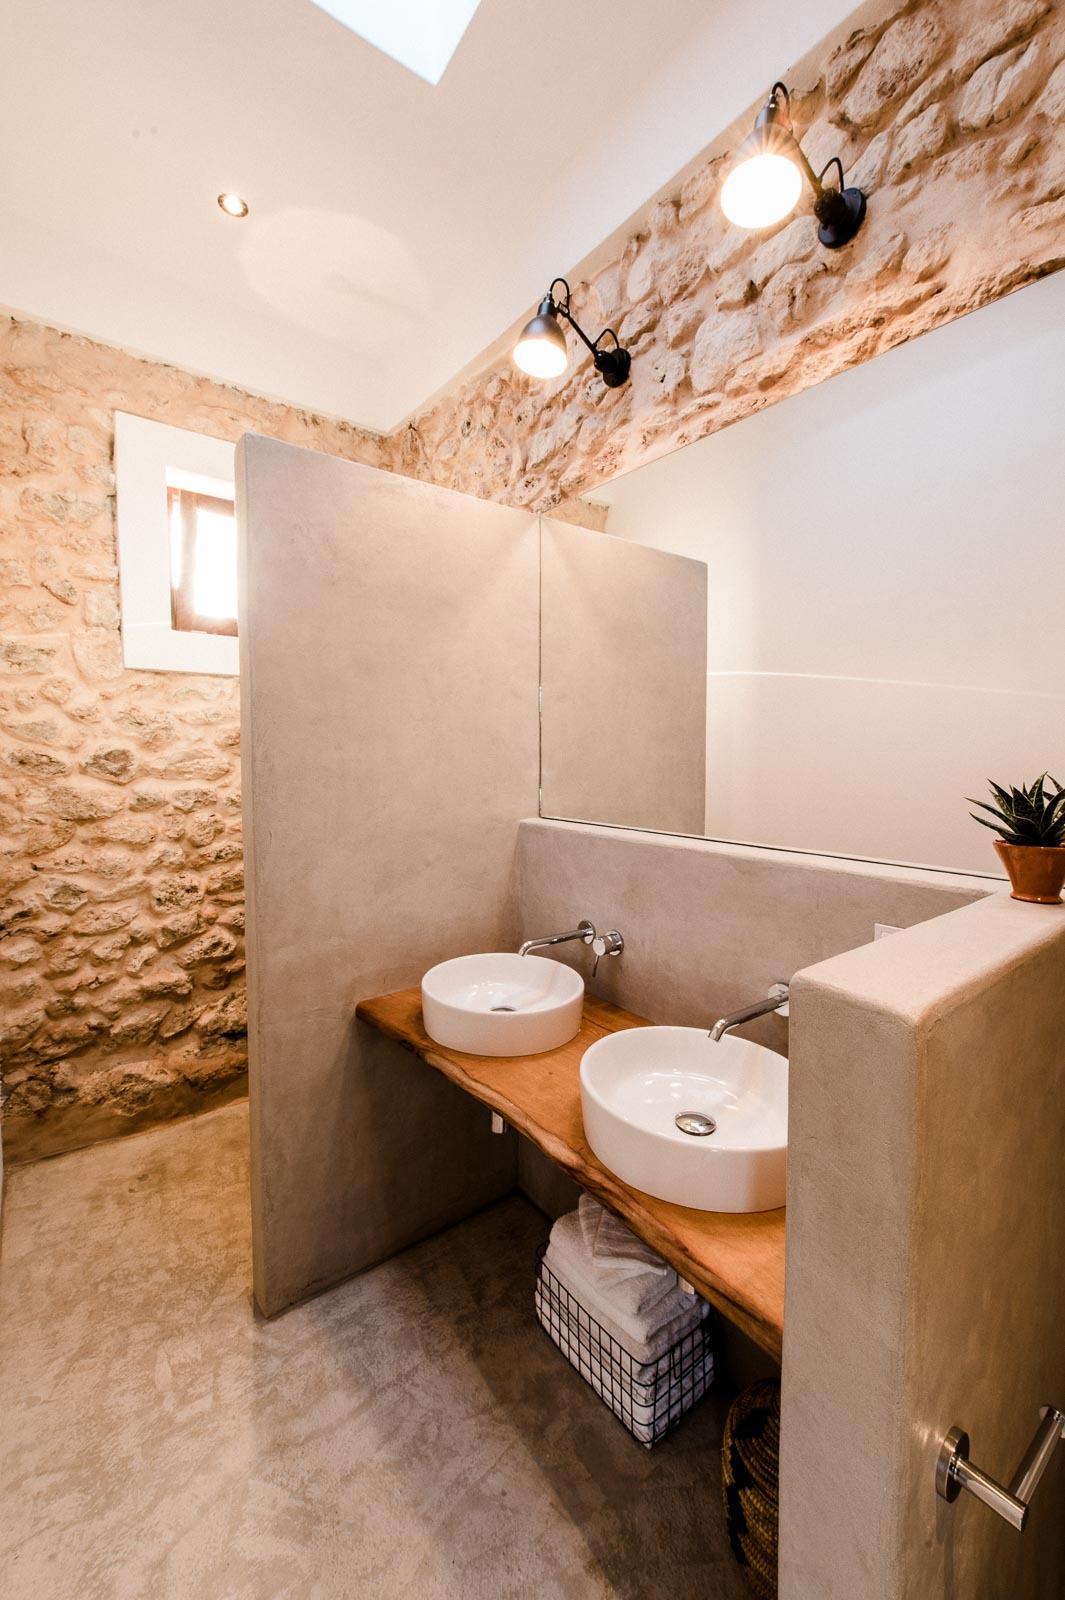 The bathroom mixes traditional stone, concrete and some warm woods that look amazing together